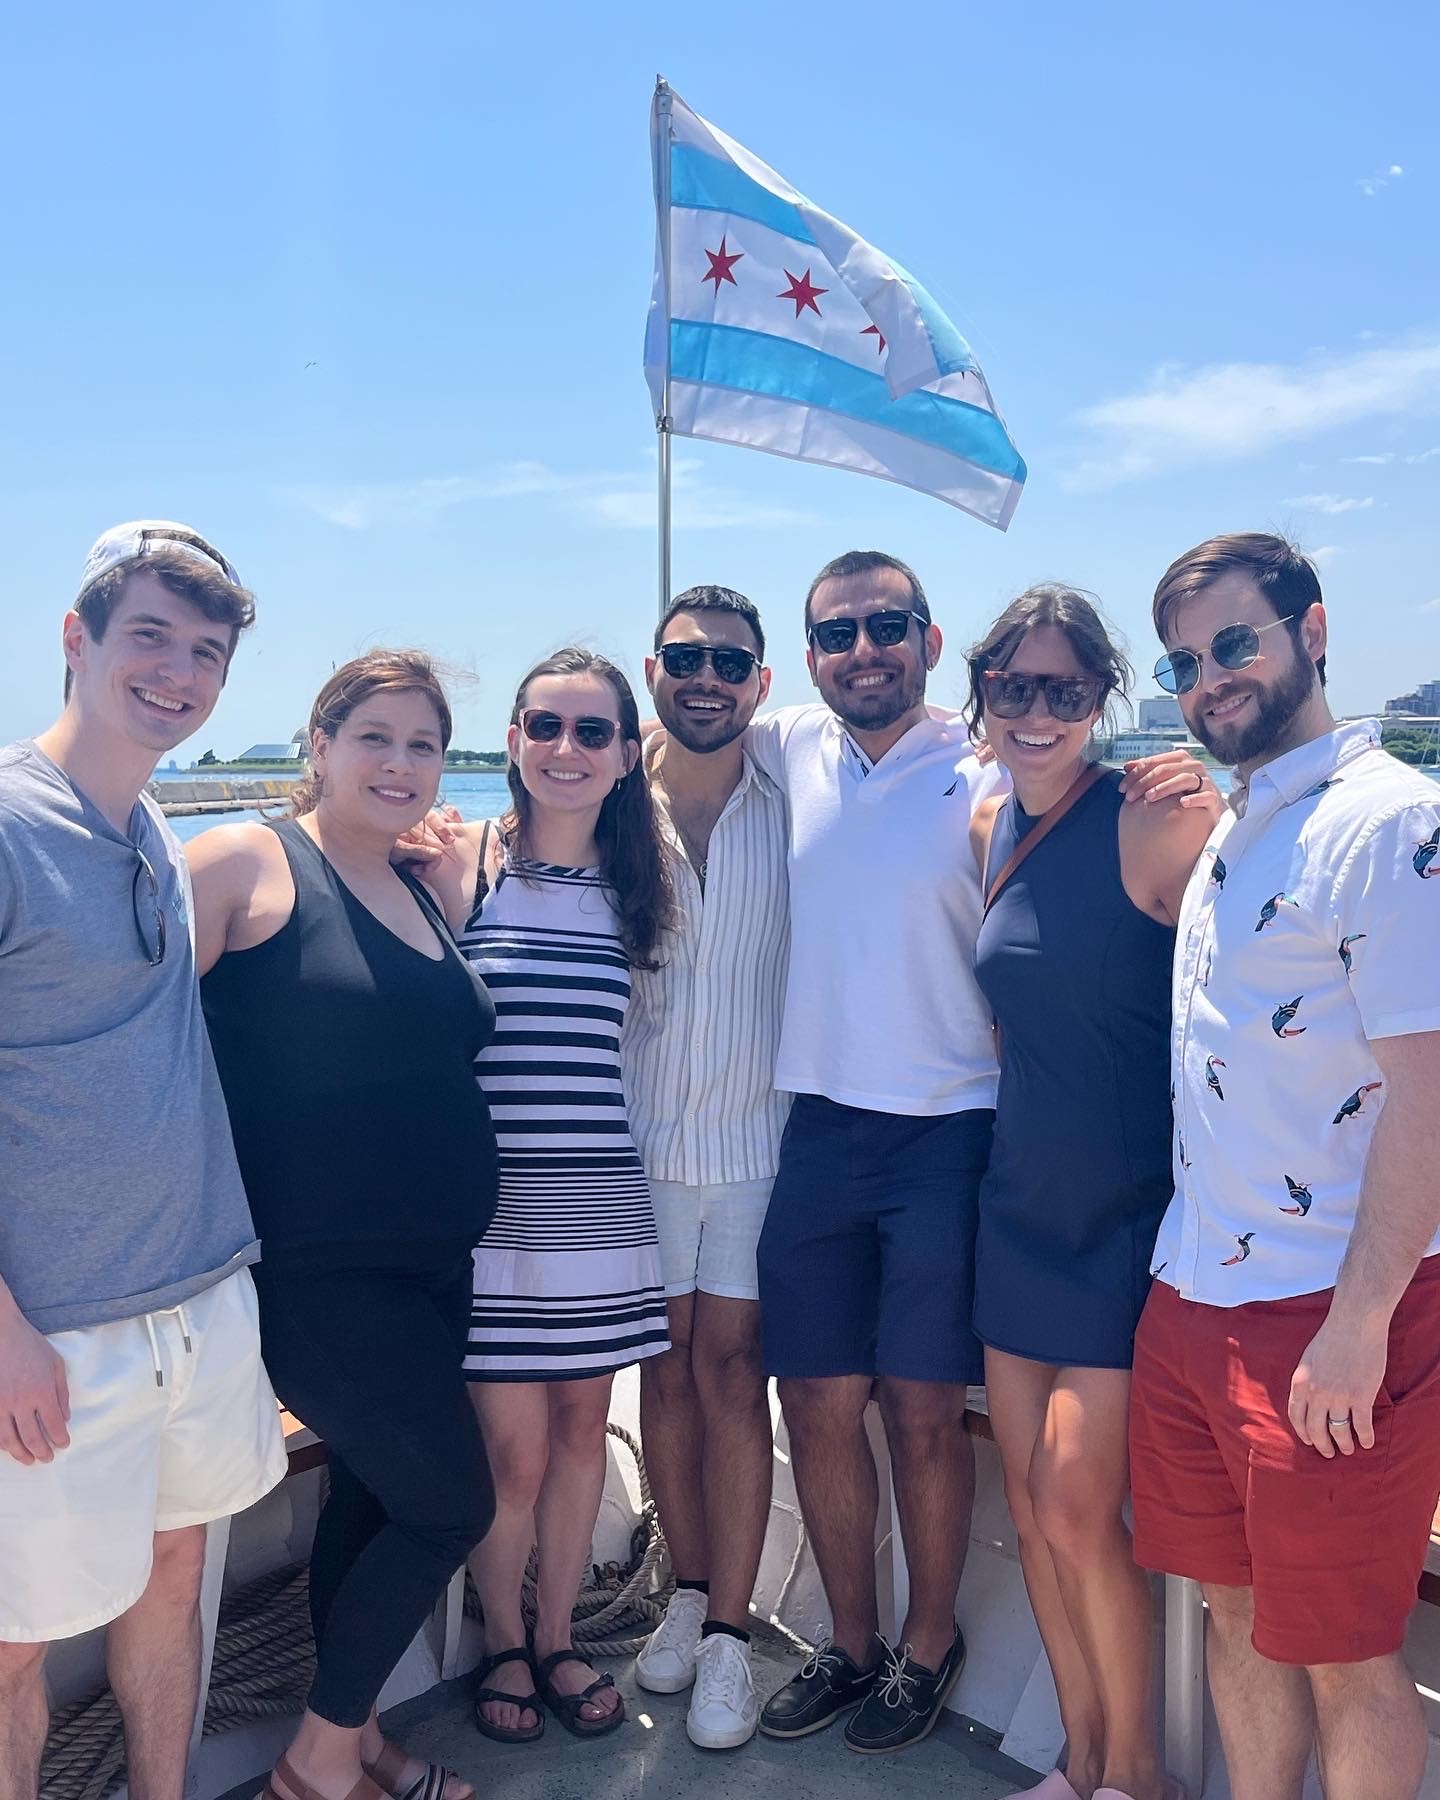 The PGY-2 residents stand on the front of a boat on Lake Michigan with a Chicago flag above them.